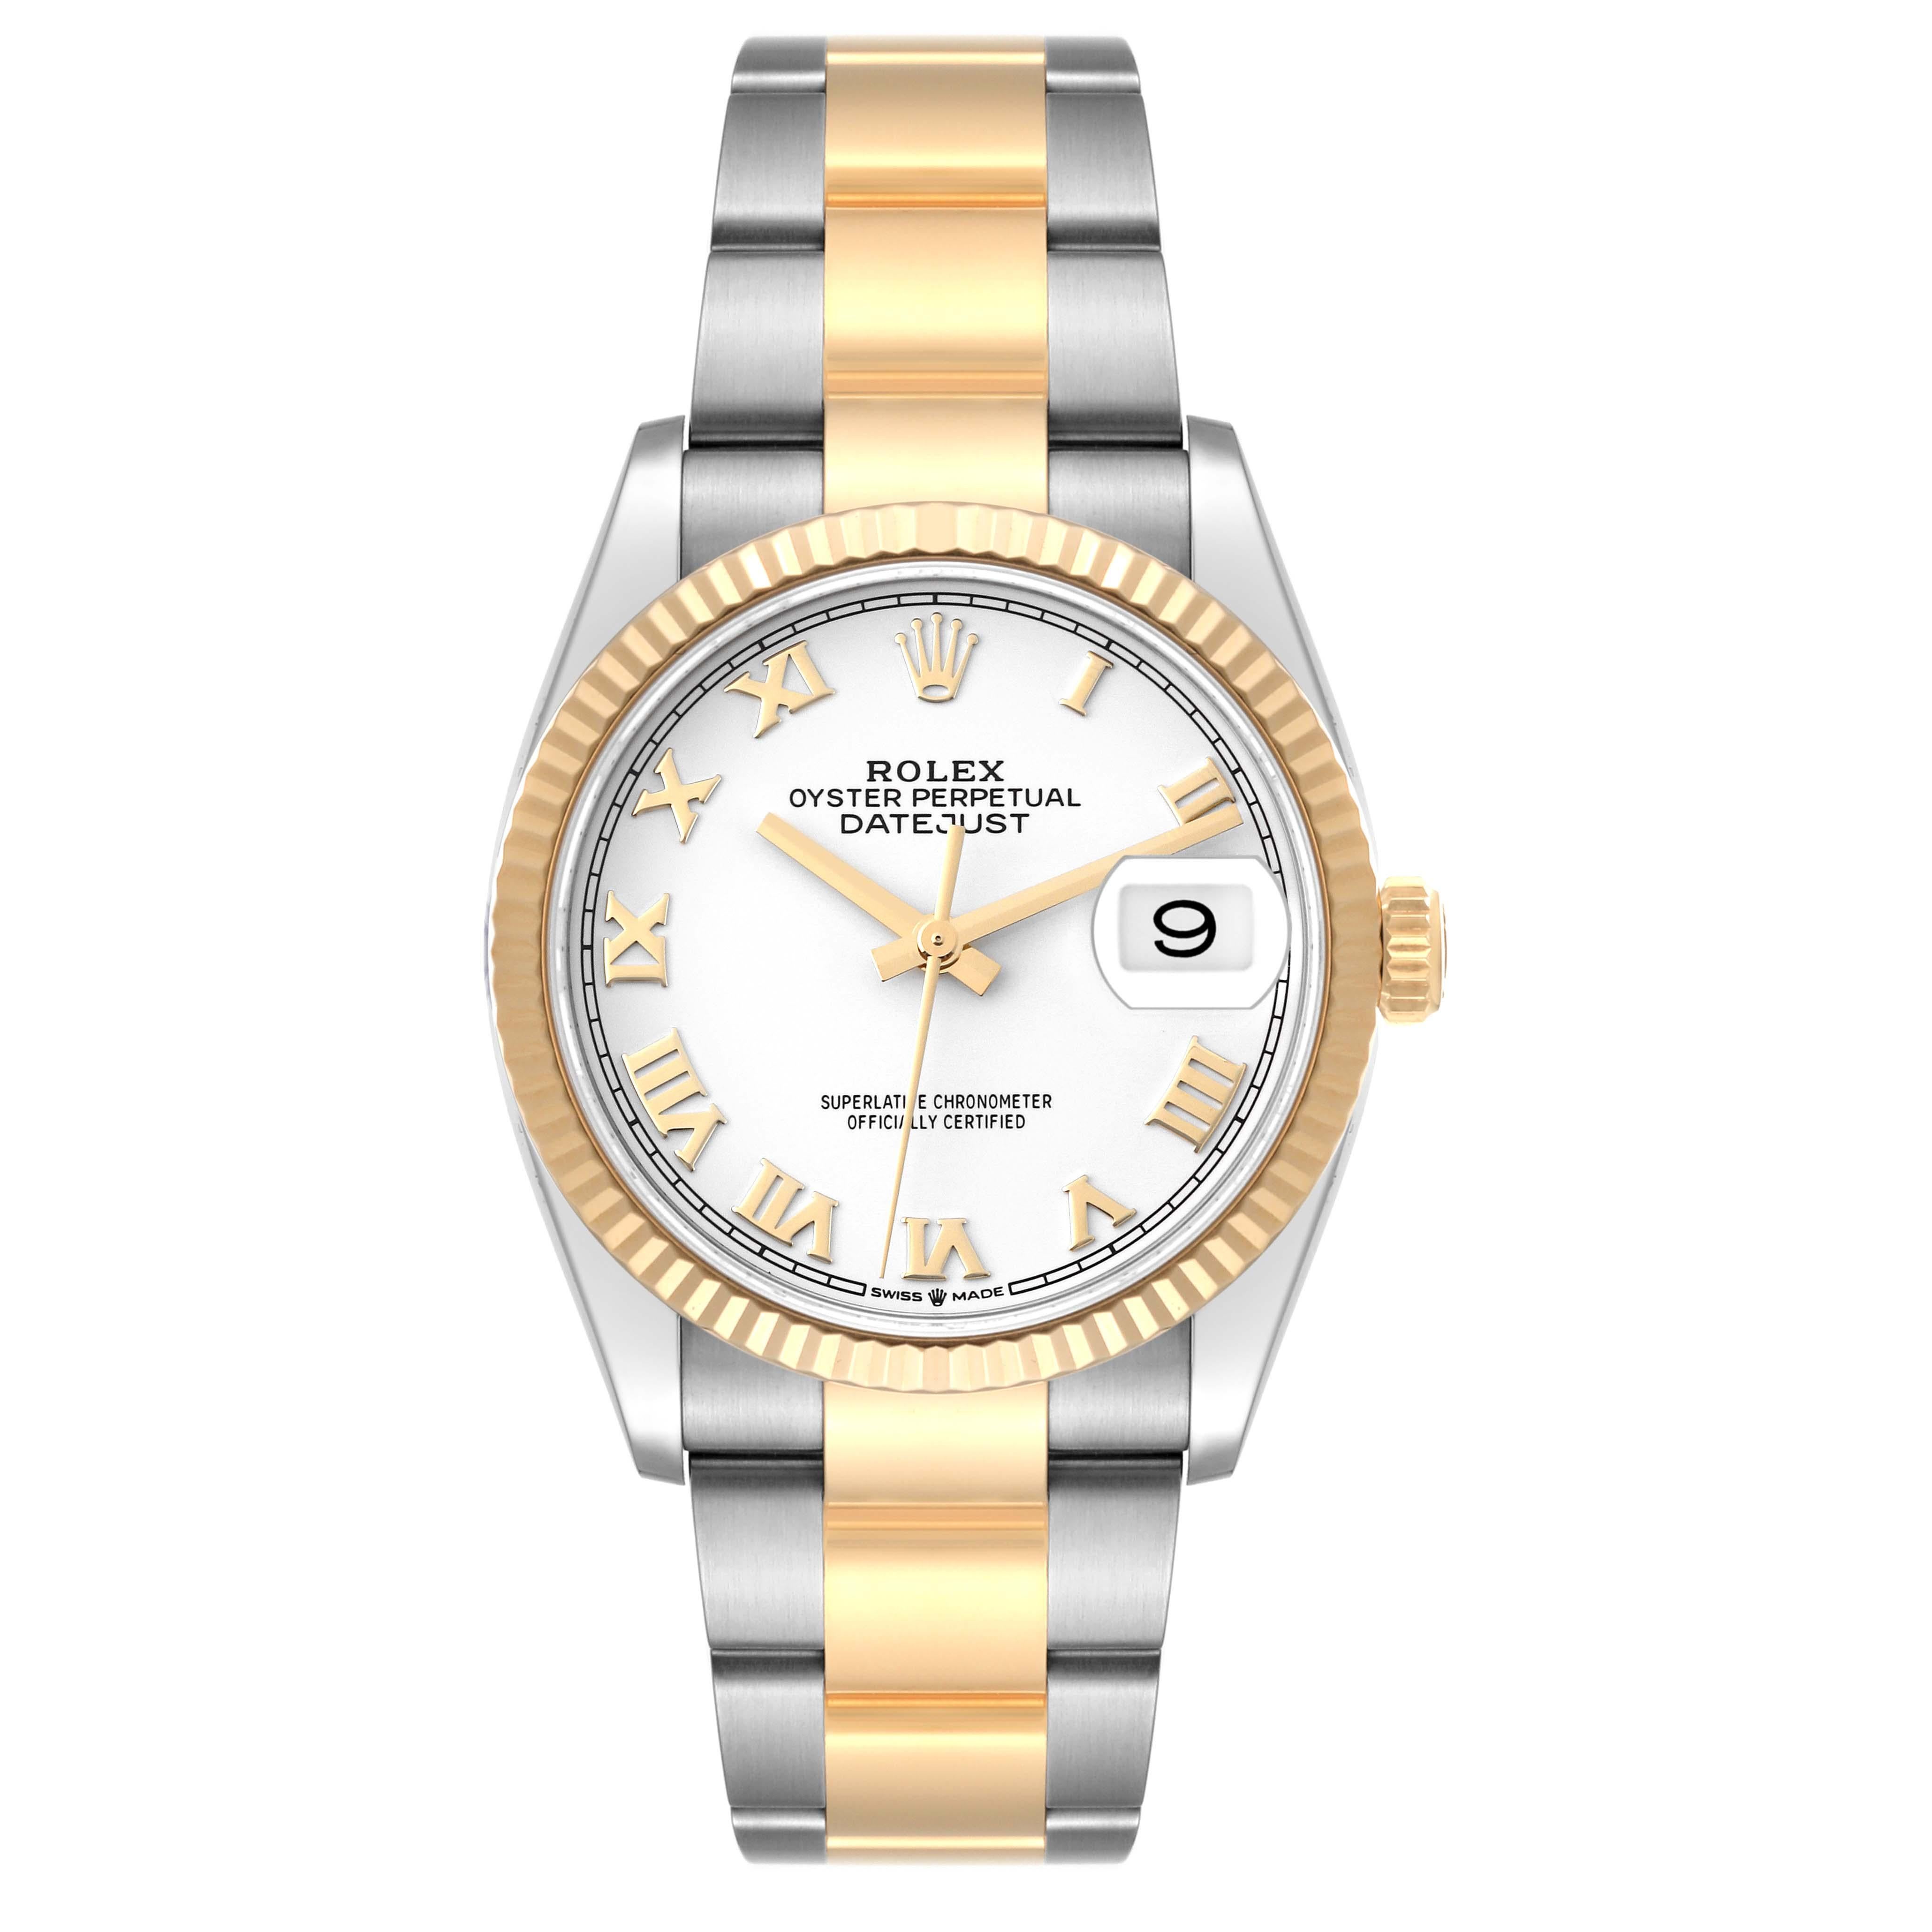 Rolex Datejust Steel Yellow Gold White Dial Mens Watch 126233 Box Card. Officially certified chronometer self-winding movement. Stainless steel and 18K yellow gold case 36.0 mm in diameter.  Rolex logo on crown. 18K yellow gold fluted bezel. Scratch